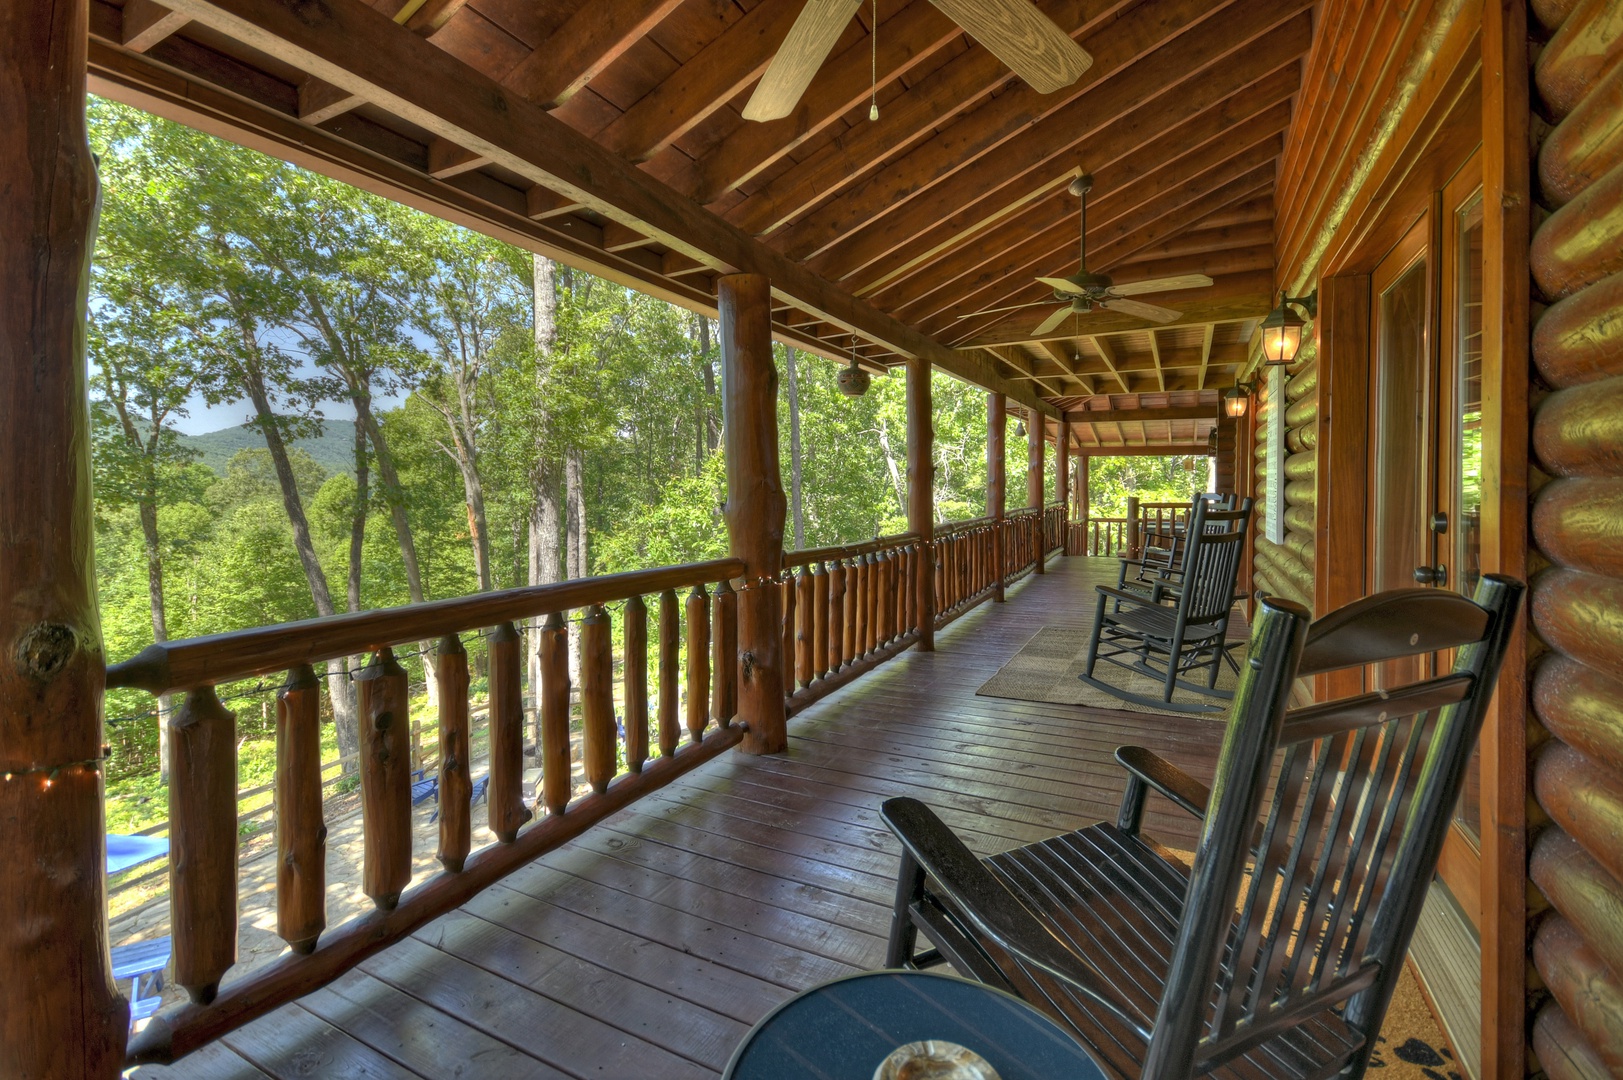 Whippoorwill Calling - Entry Level Deck Rocking Chairs